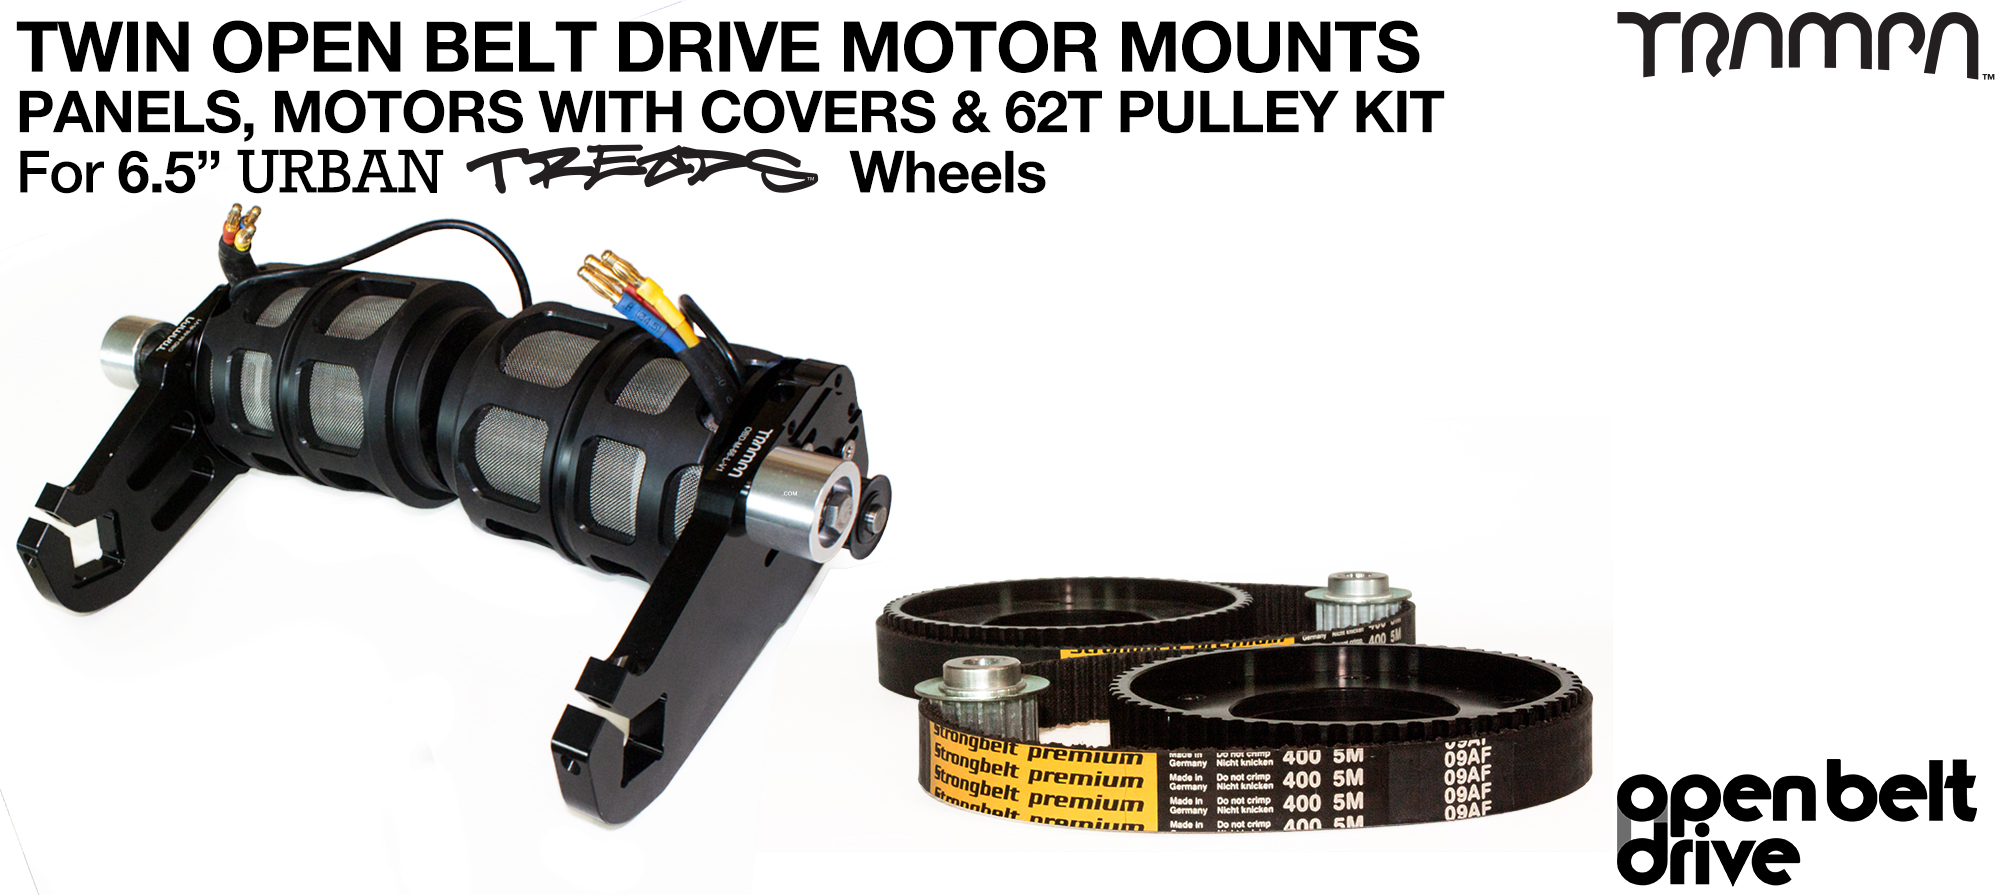 66T OBD Motor Mount with 62T Pulley kit, Motor & Filters  - TWIN